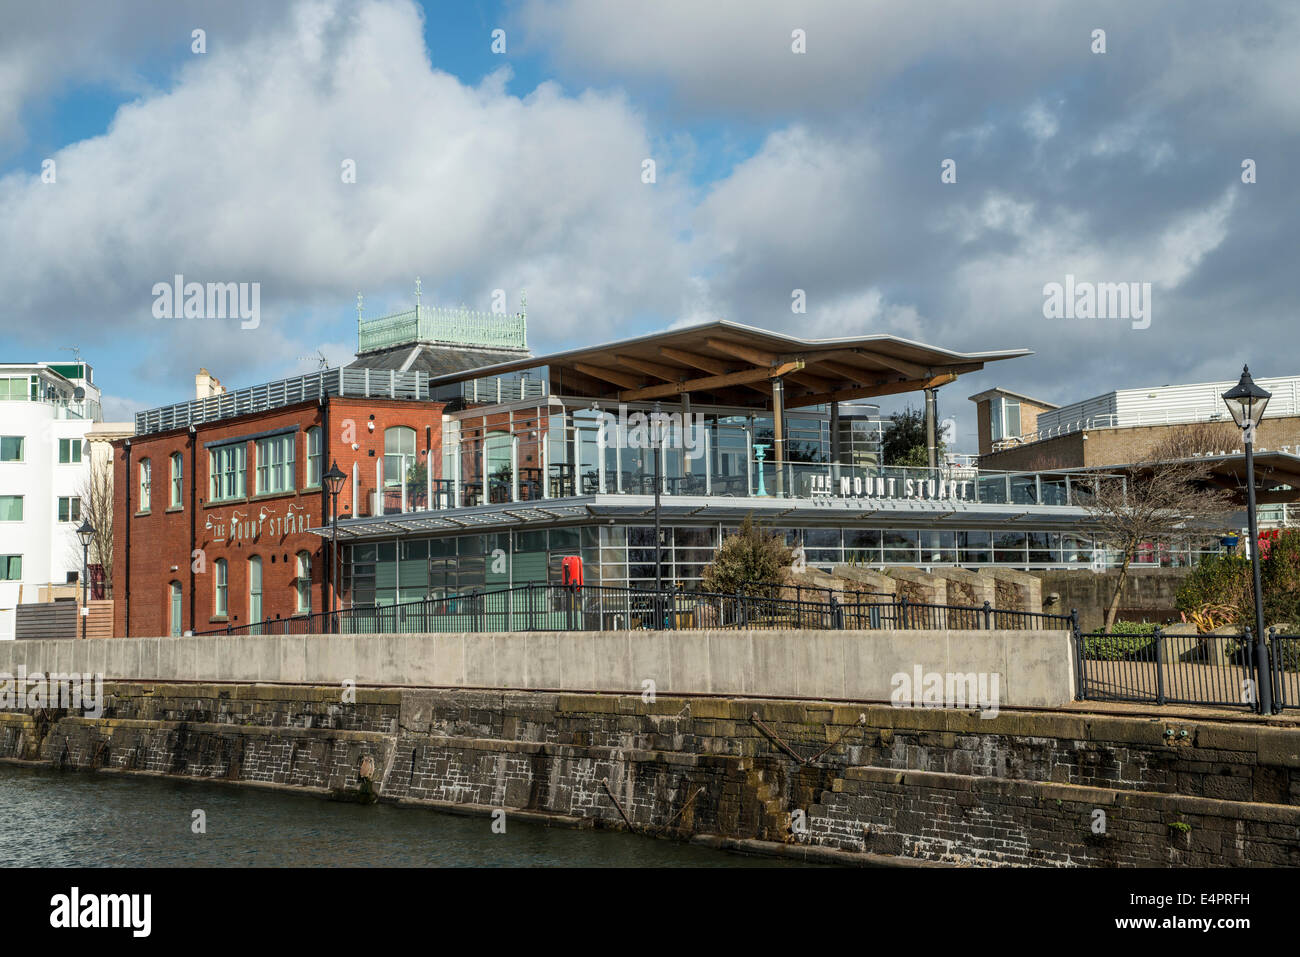 The Mount Stuart Public House in Cardiff Bay, south Wales UK Stock Photo